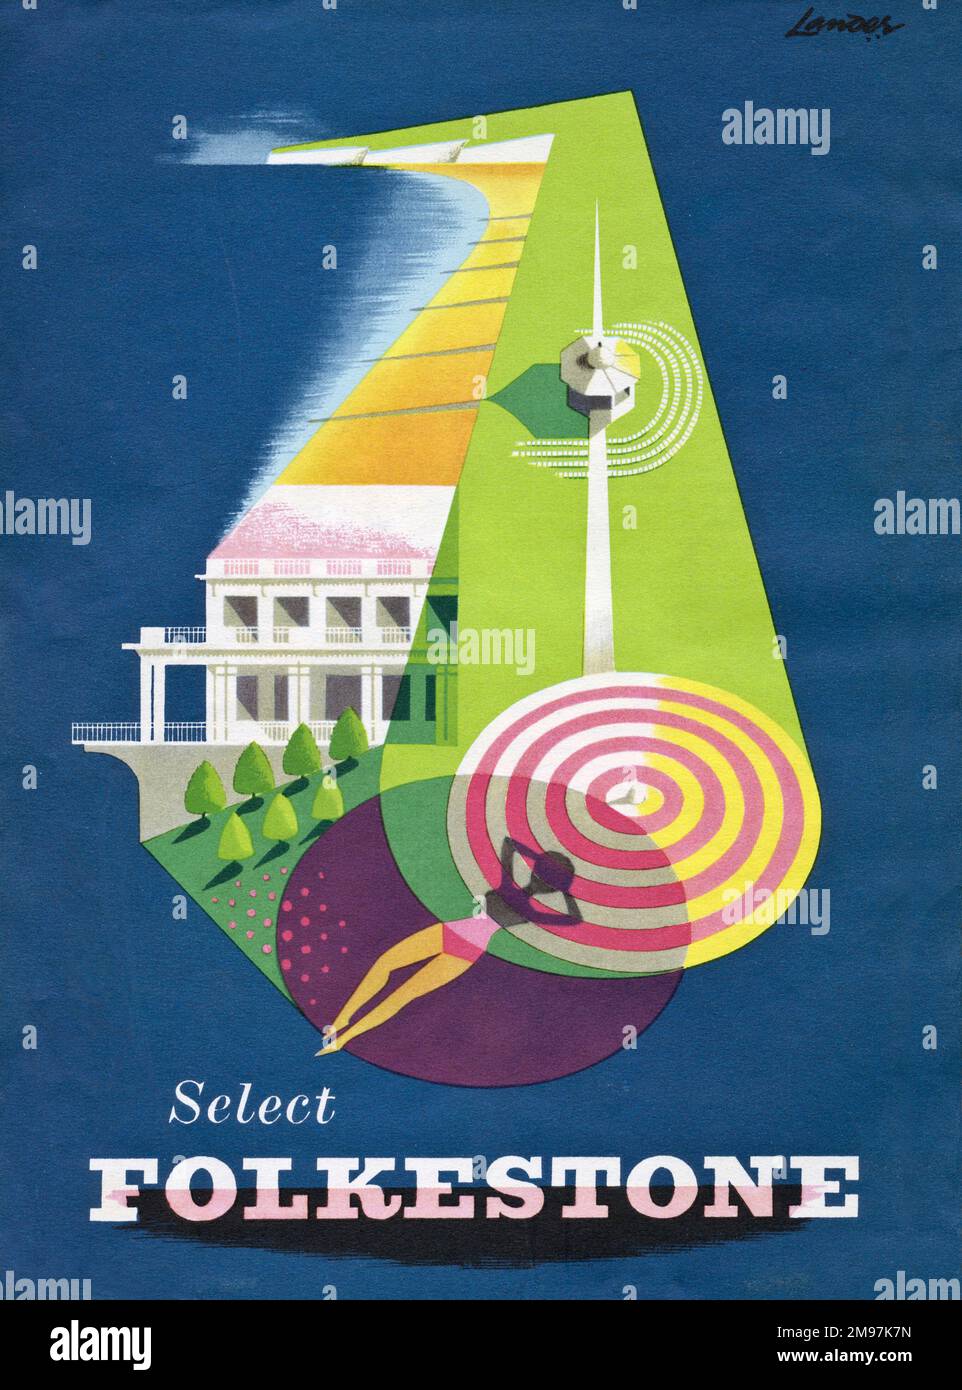 Poster by Lander, Select Folkestone, advertising the town as a holiday destination. Stock Photo